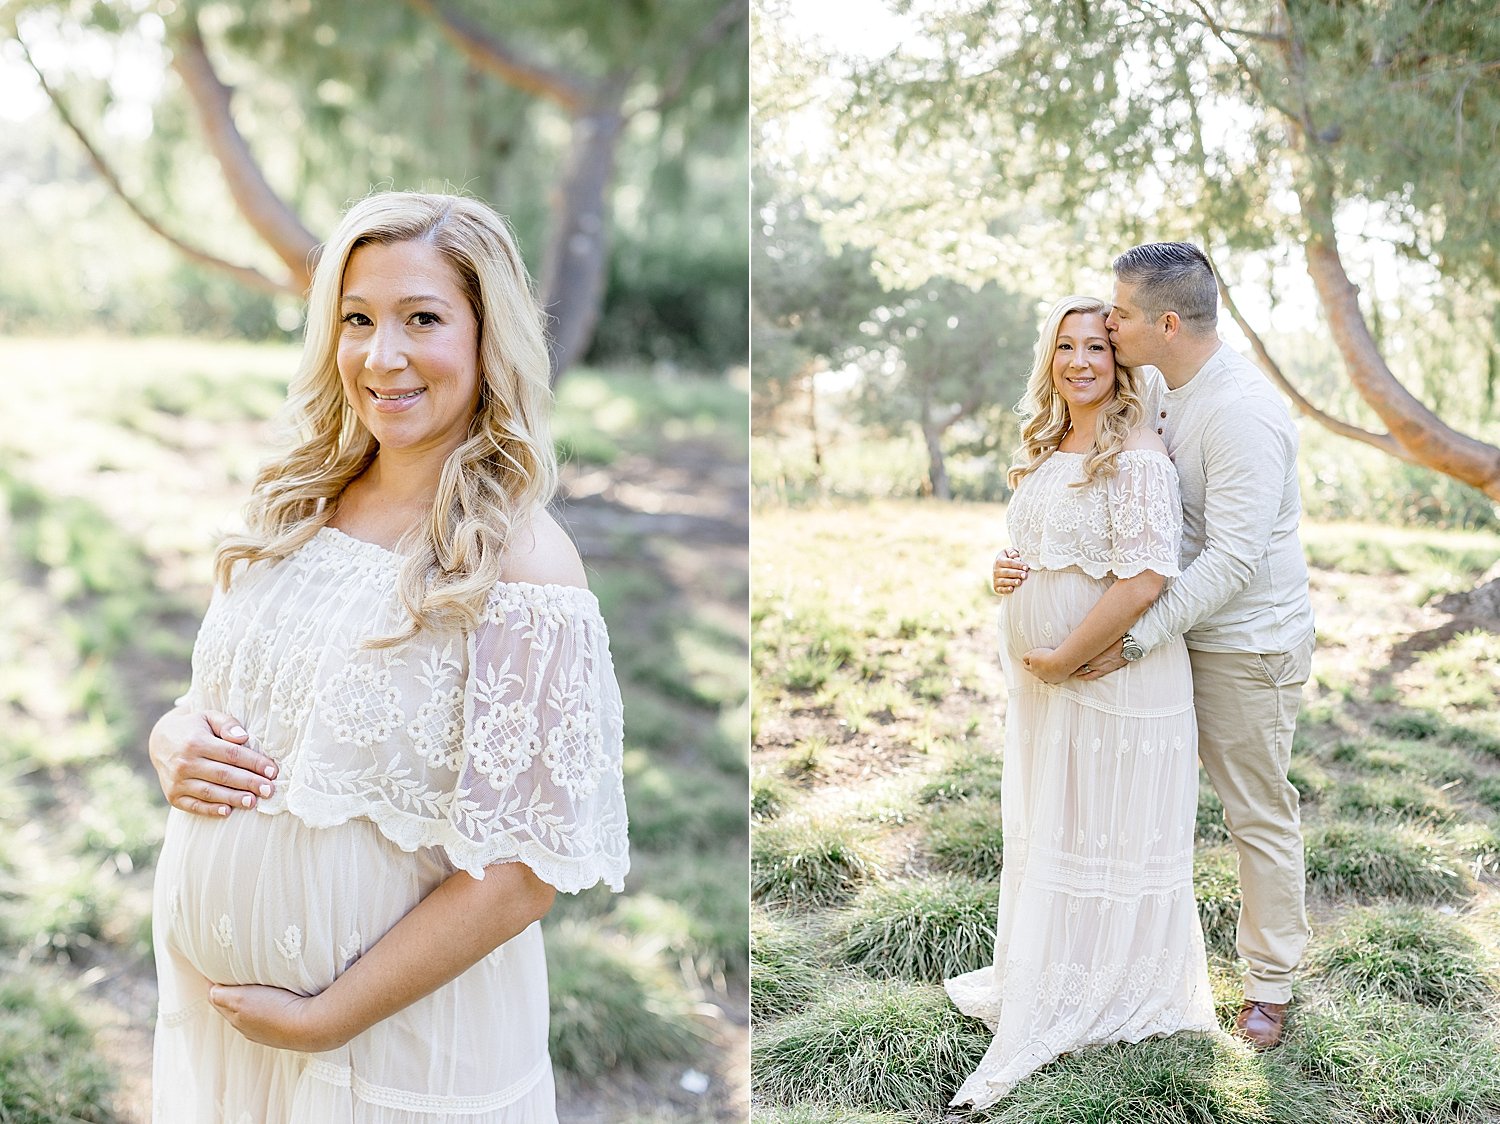 Expecting mom at maternity photoshoot with Ambre Williams Photography.